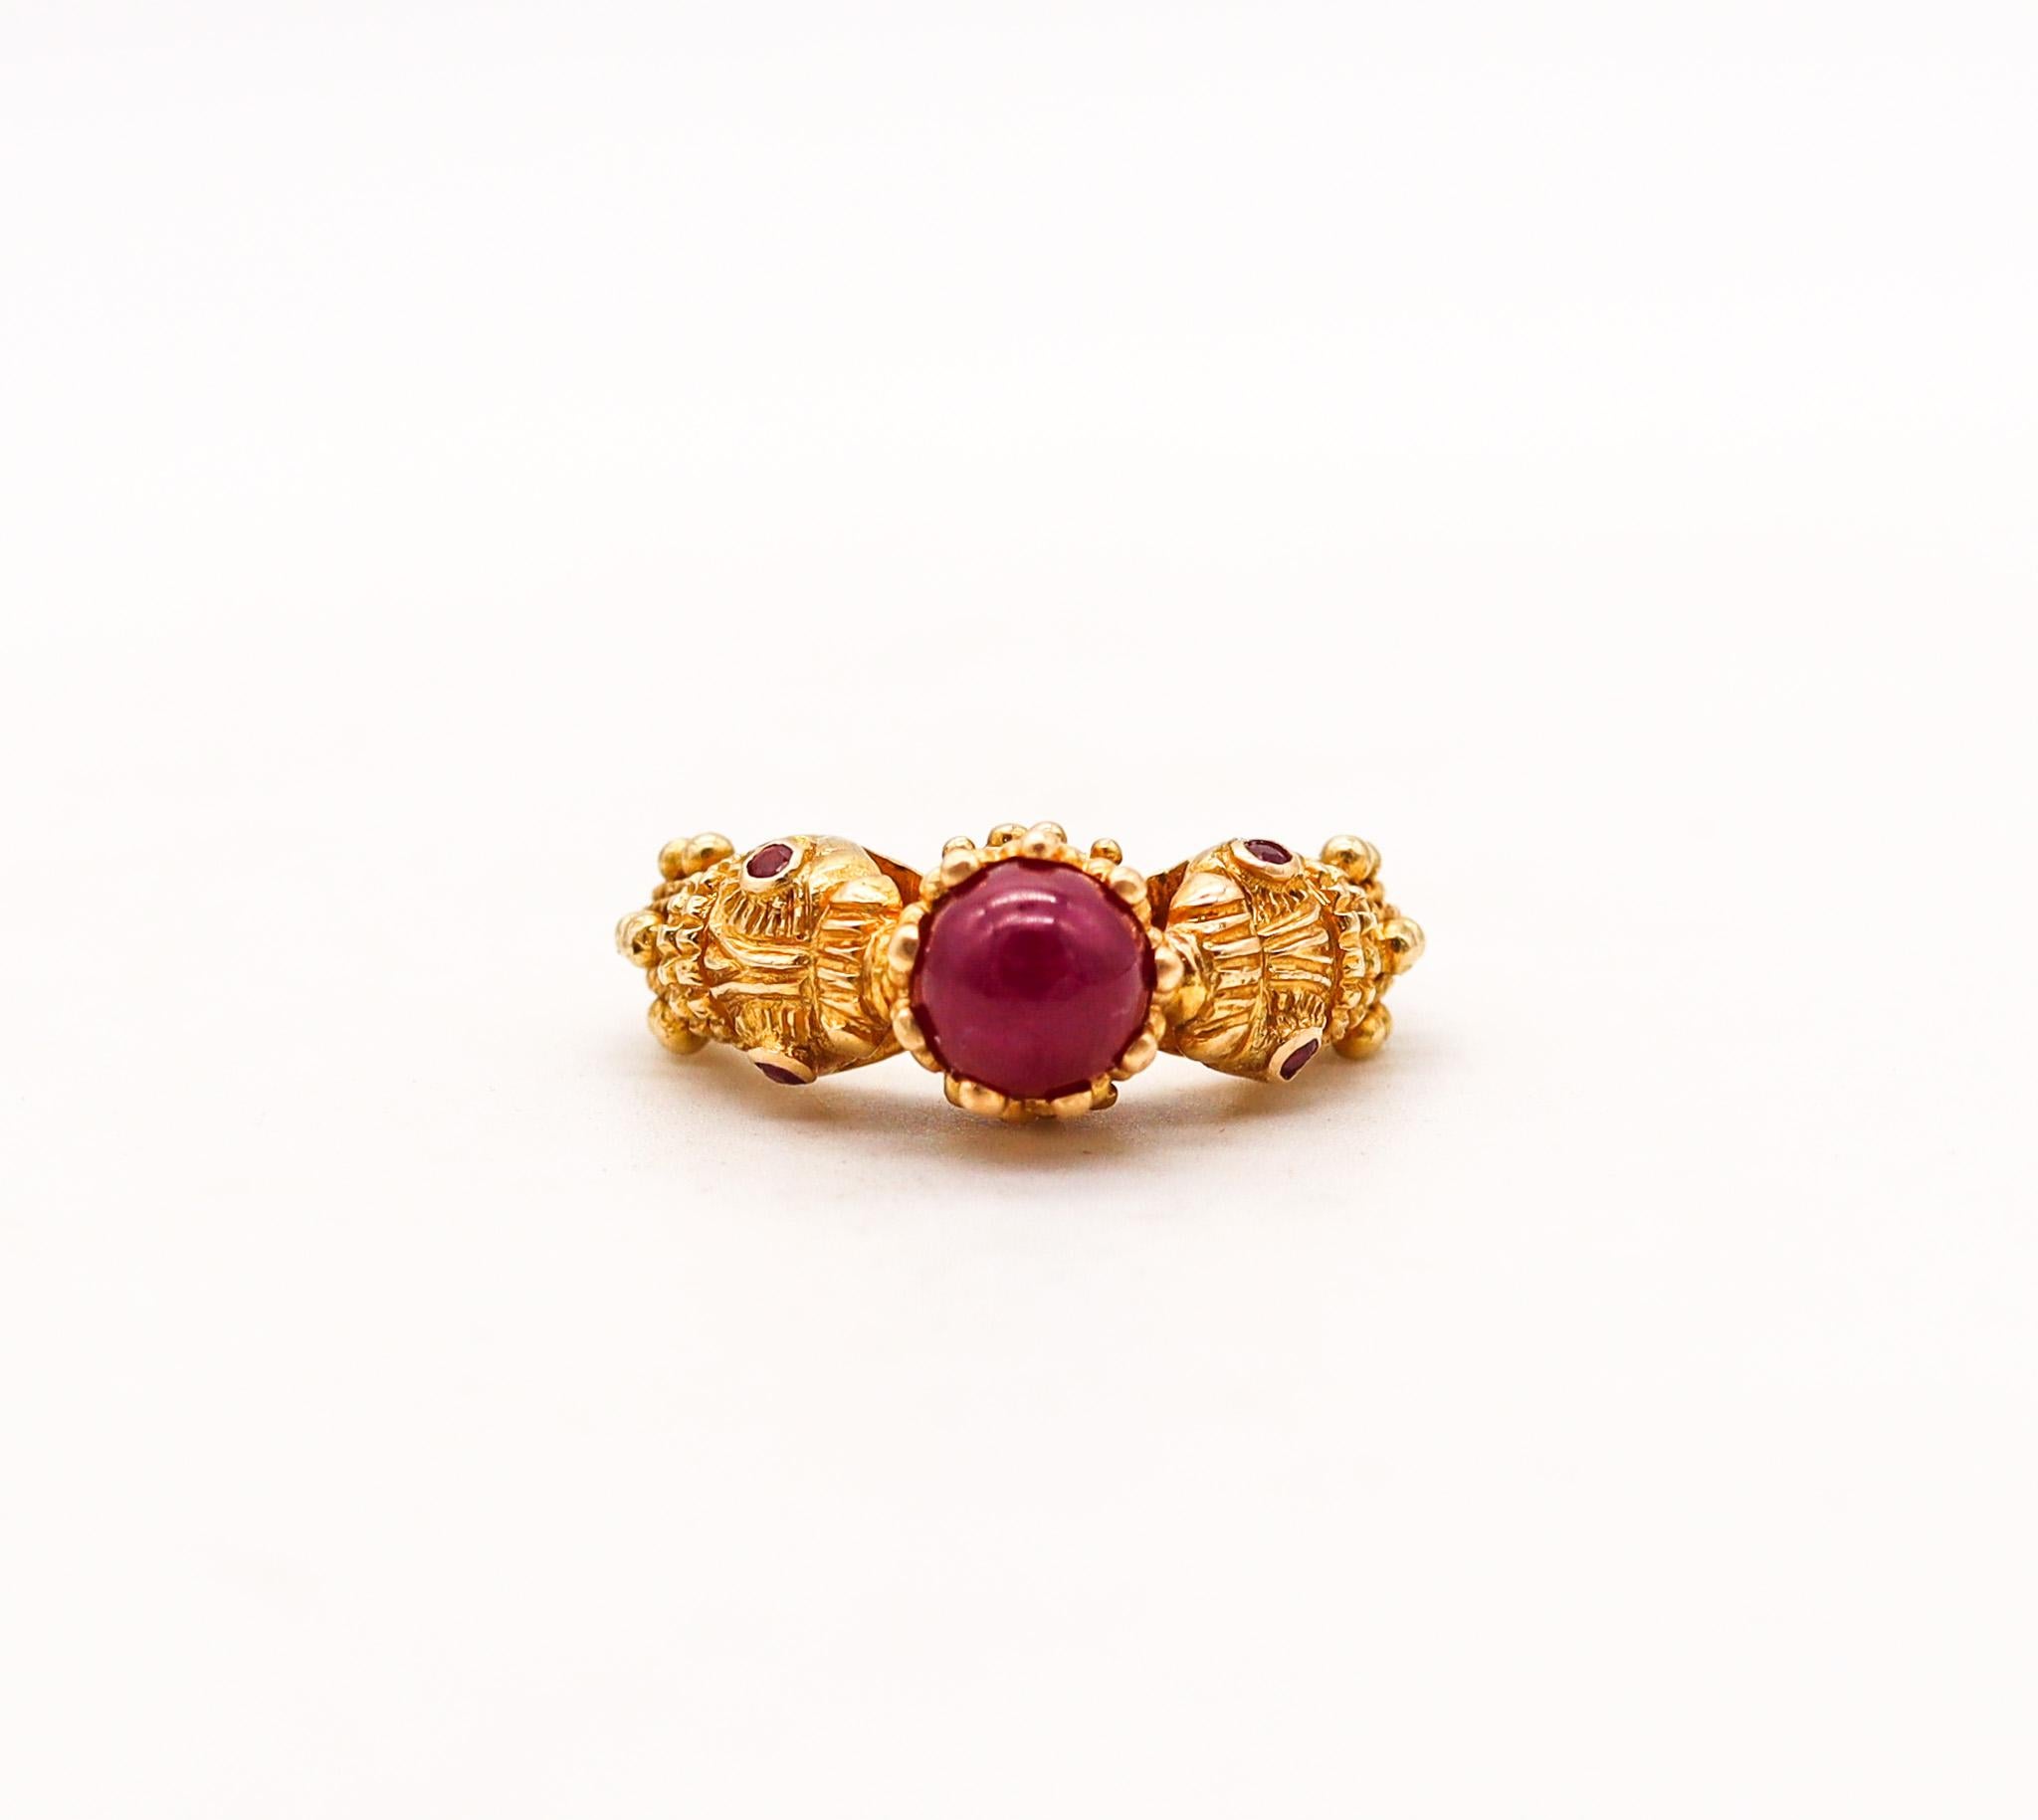 Hellenistic Lalaounis 1970 Double Chimeras Ring In 18Kt Yellow Gold With 1.96 Ctw In Rubies